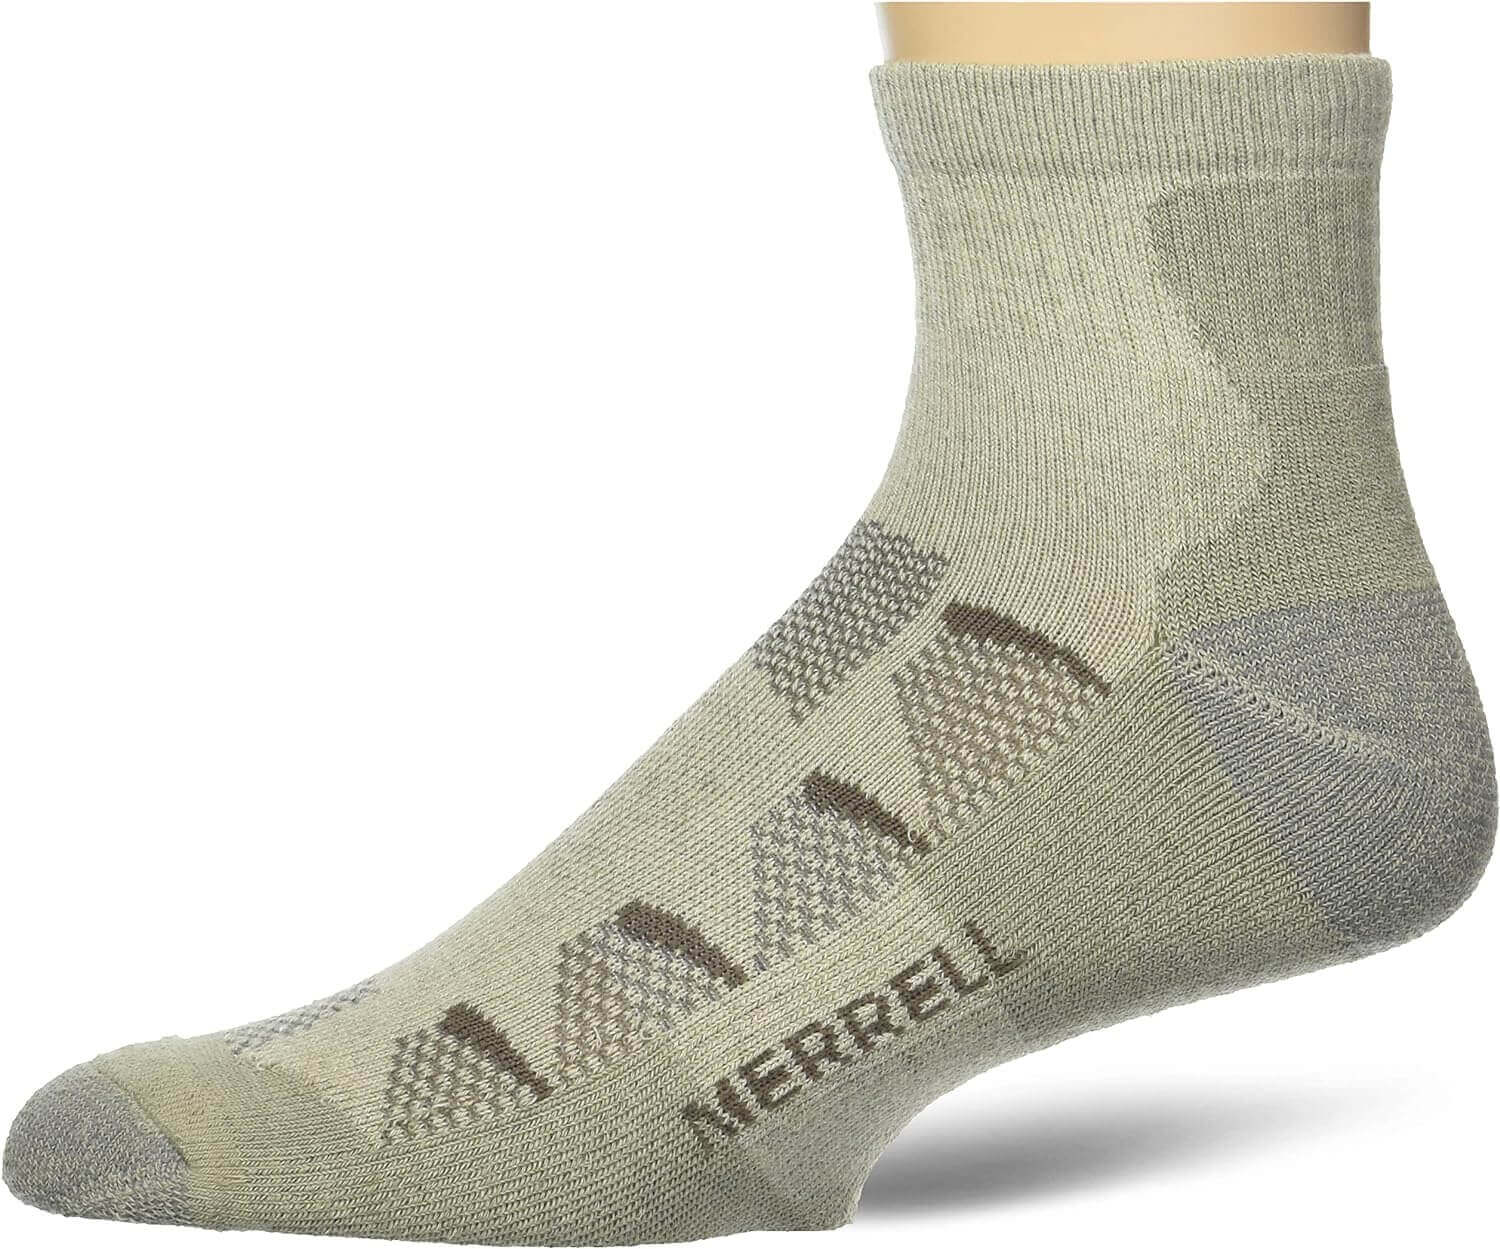 Shop The Latest >Merrell Men's and Women's Moab Hiking Mid Cushion Socks > *Only $20.29*> From The Top Brand > *Merrelll* > Shop Now and Get Free Shipping On Orders Over $45.00 >*Shop Earth Foot*